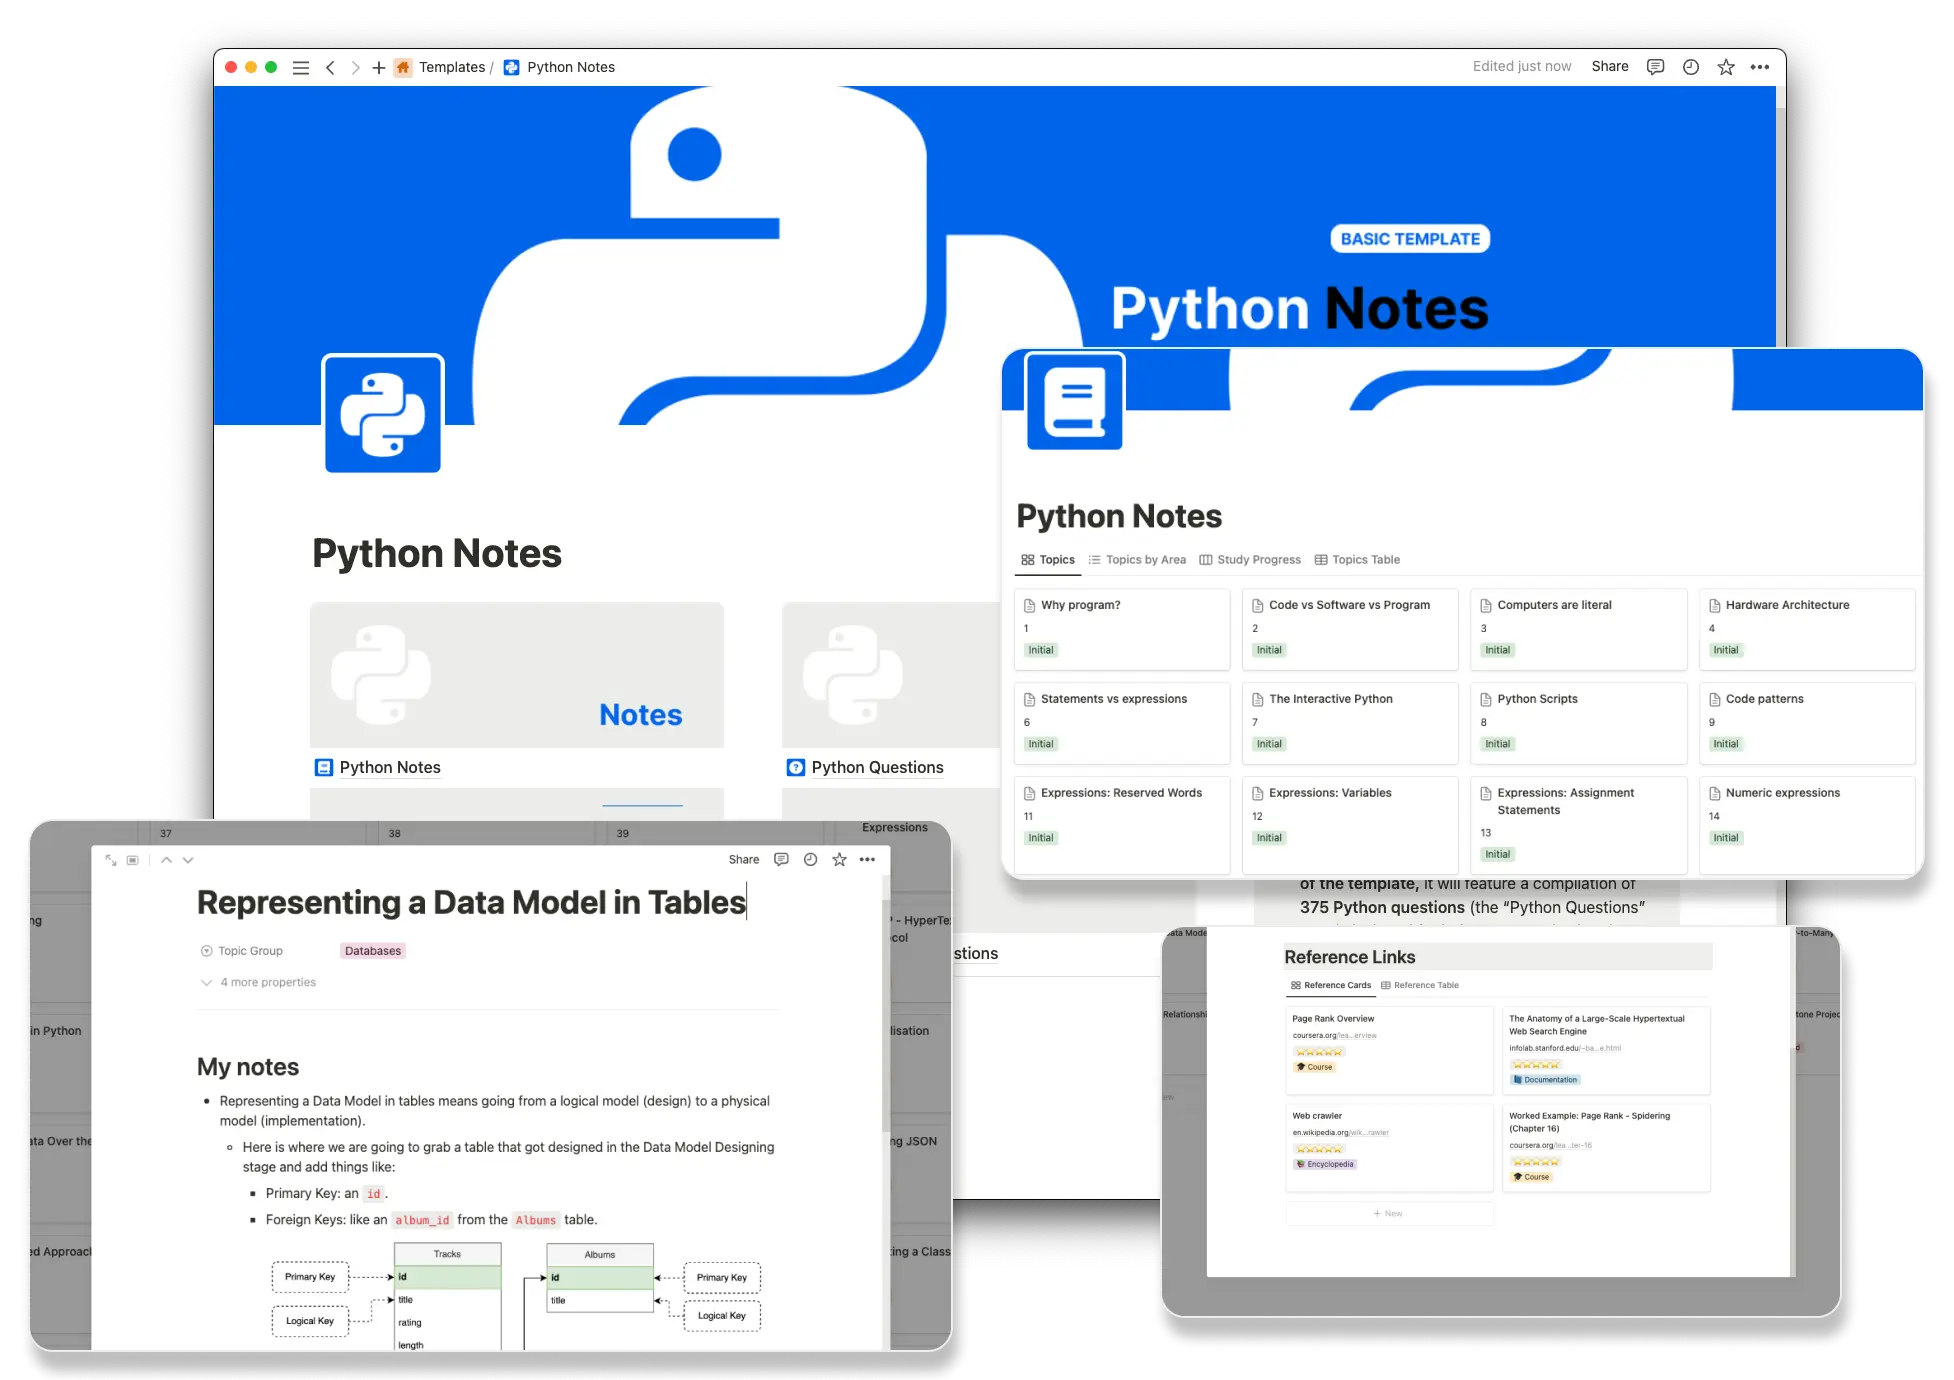 Python Notes Overview